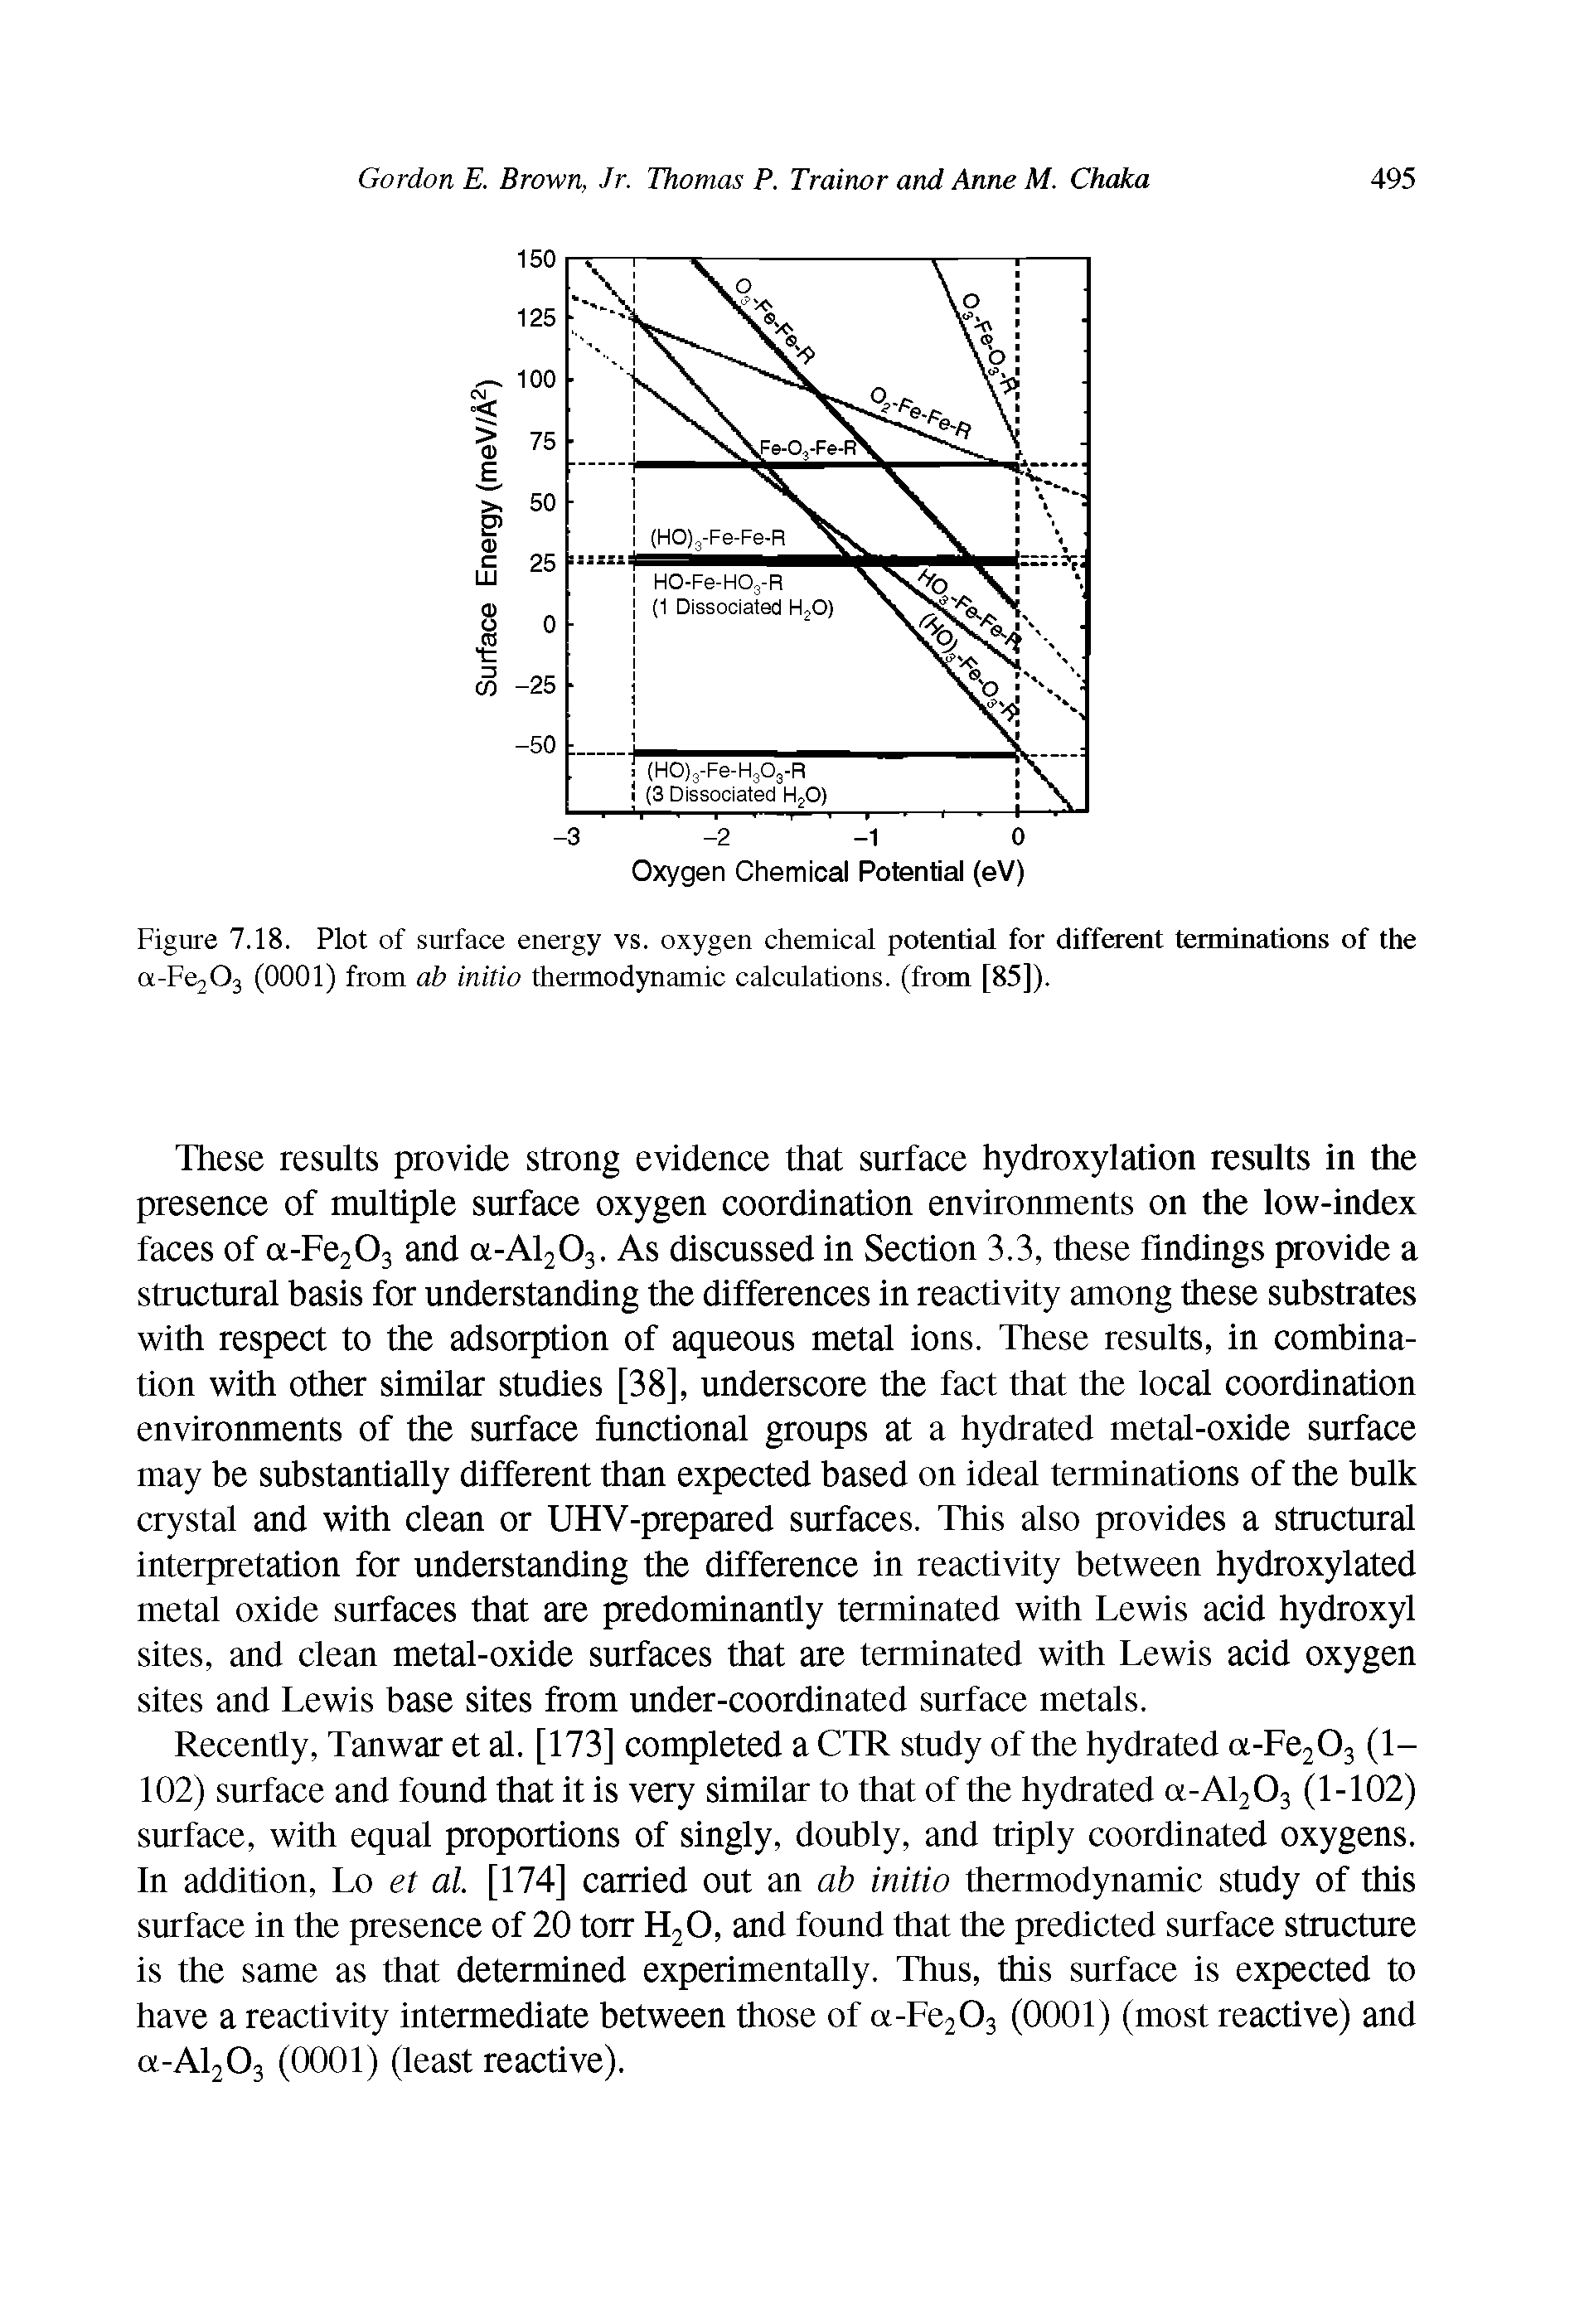 Figure 7.18. Plot of surface energy vs. oxygen chemical potential for different terminations of the a-Fe203 (0001) from ab initio thermodynamic calculations, (from [85]).